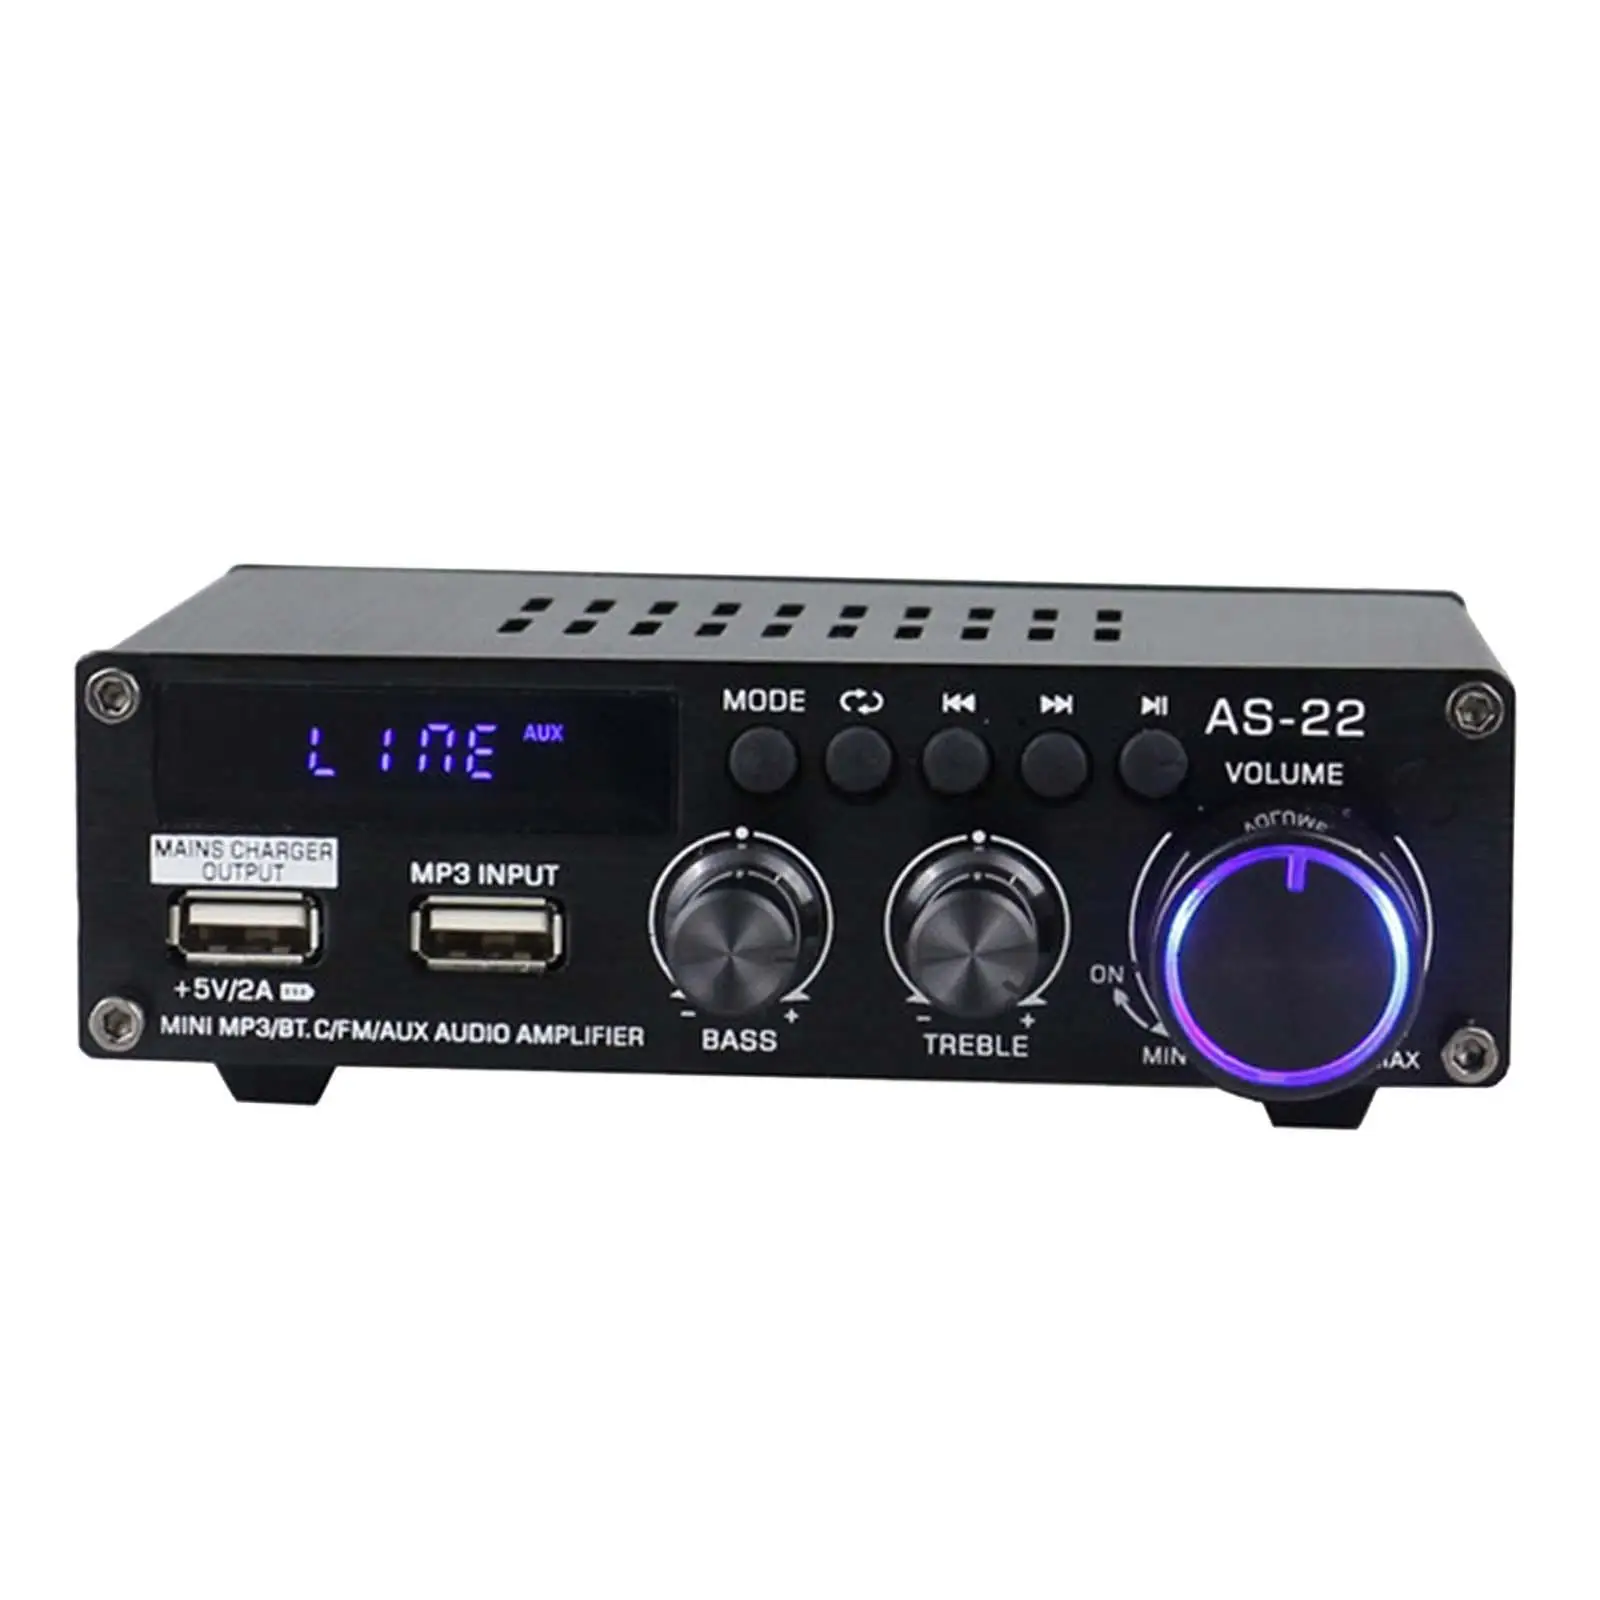 

Audio Stereo Amplifier Receiver 2 Channel USB Player Tabletop for Home Speakers HiFi with Bass and Control Knobs V5.0